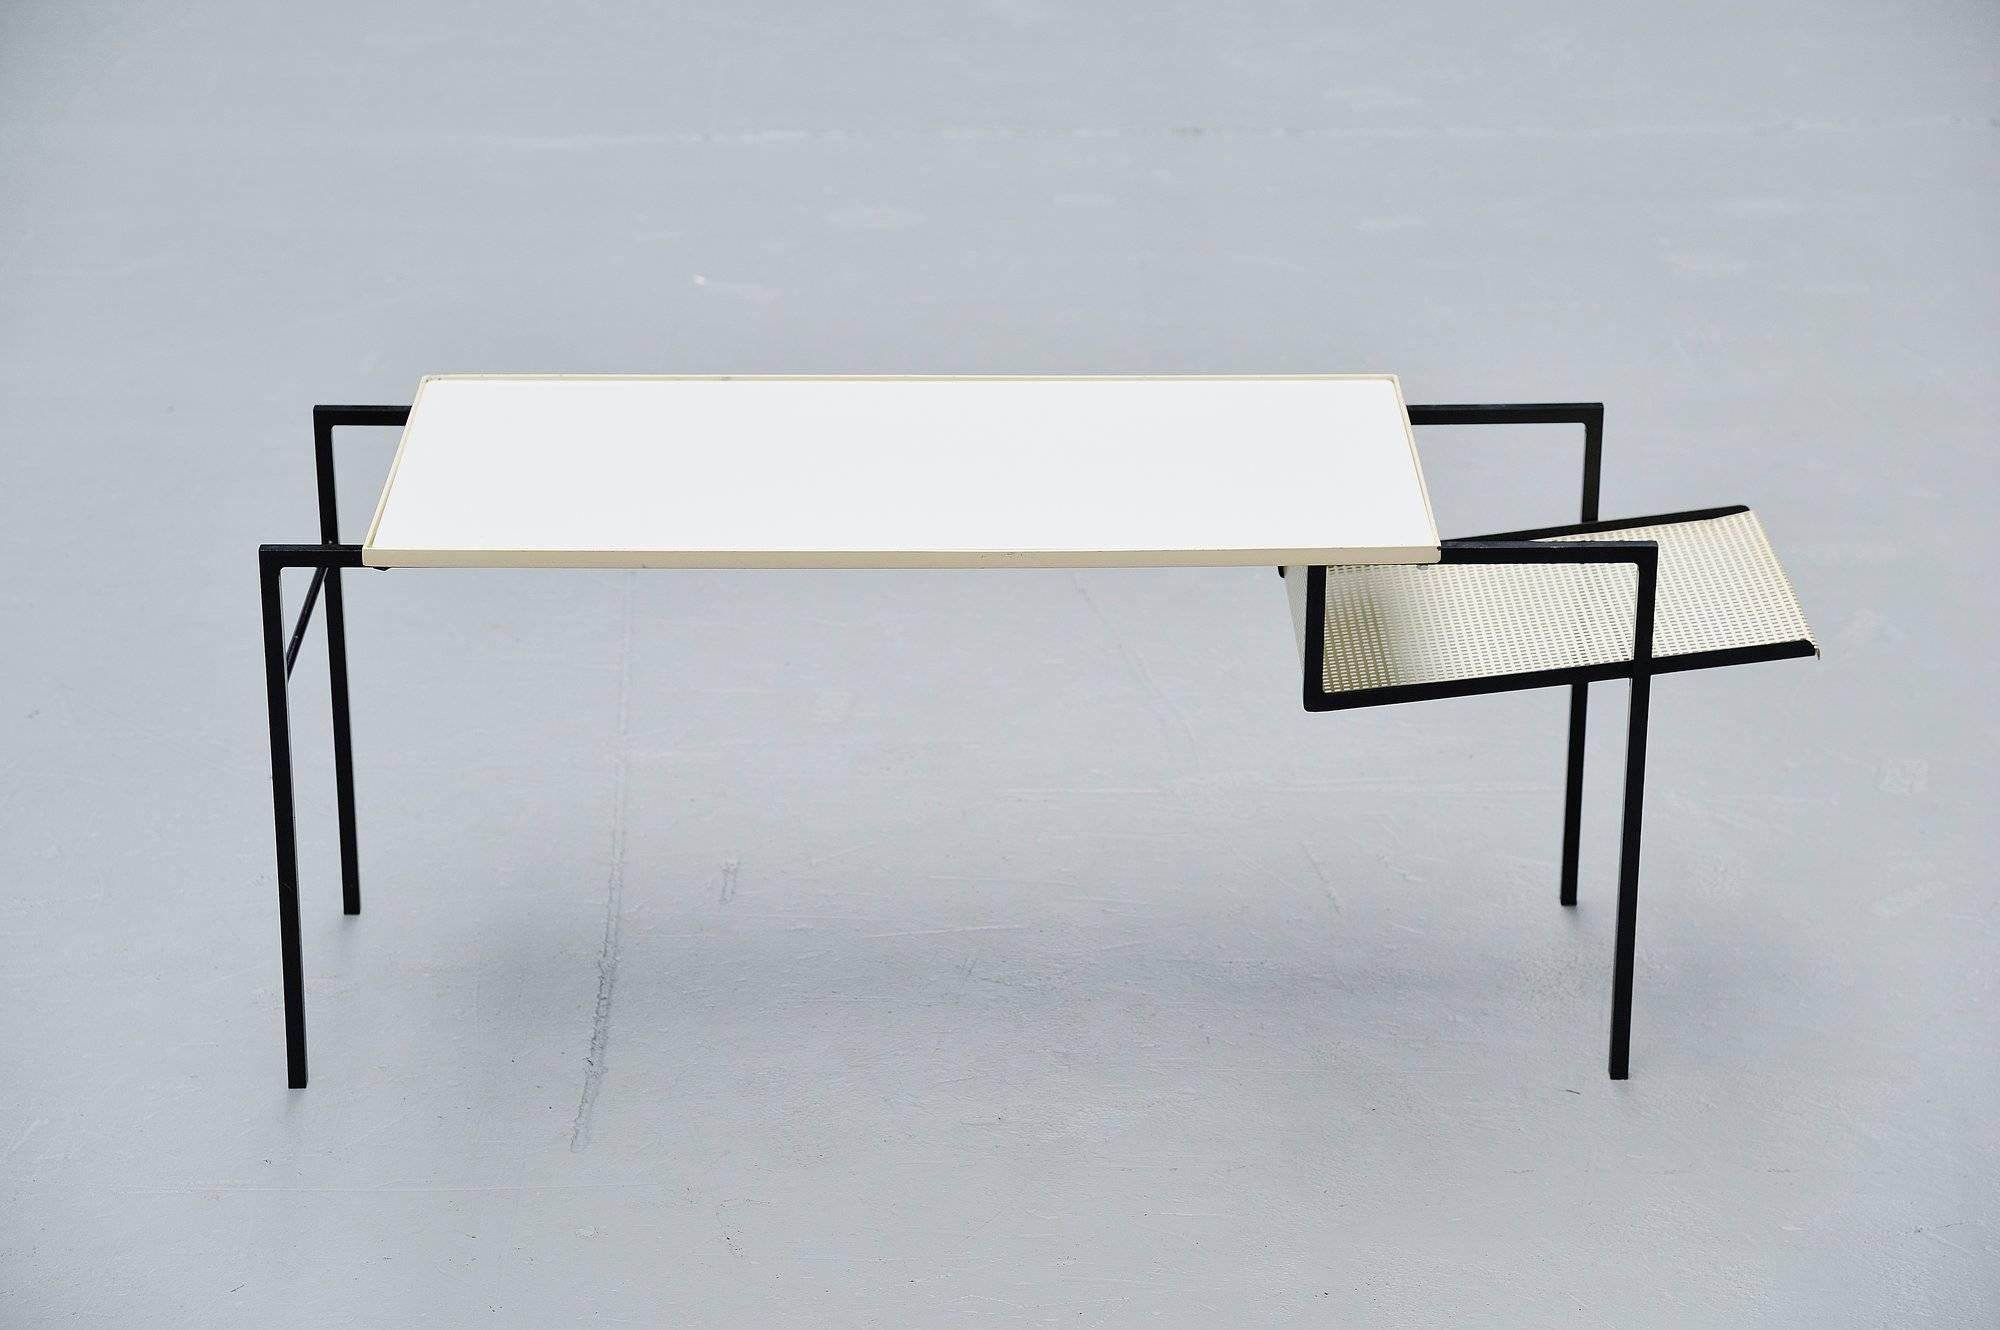 Super rare side or magazine table designed by Floris Fiedeldij for Artimeta Soest, Holland 1955. This rare table has a solid steel frame, black lacquered. A white glass top and a die cut magazine rack. The table is in original condition. A fantastic